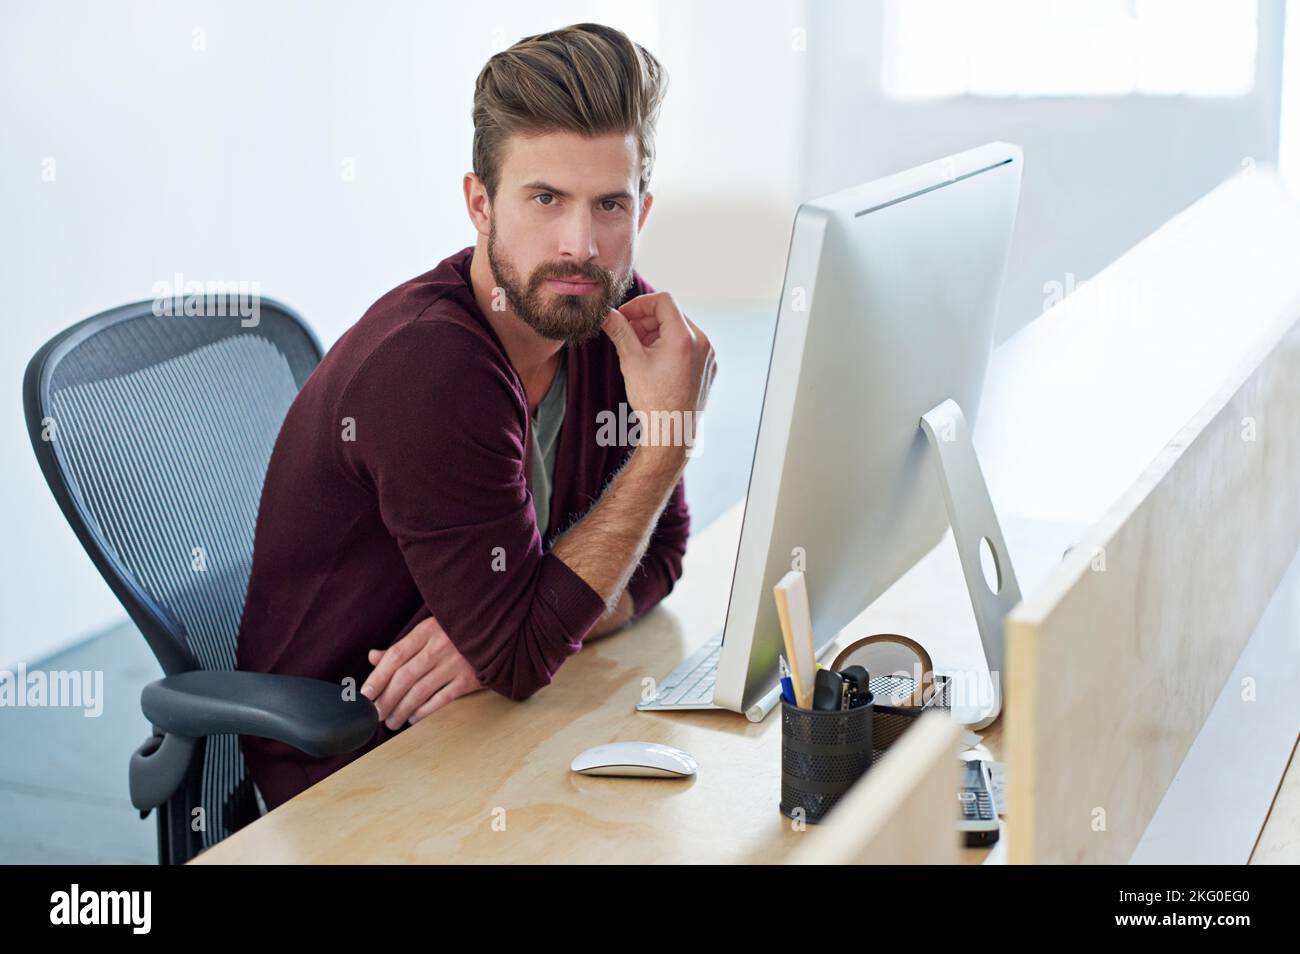 Hes one focused professional. a designer at work in an office. Stock Photo